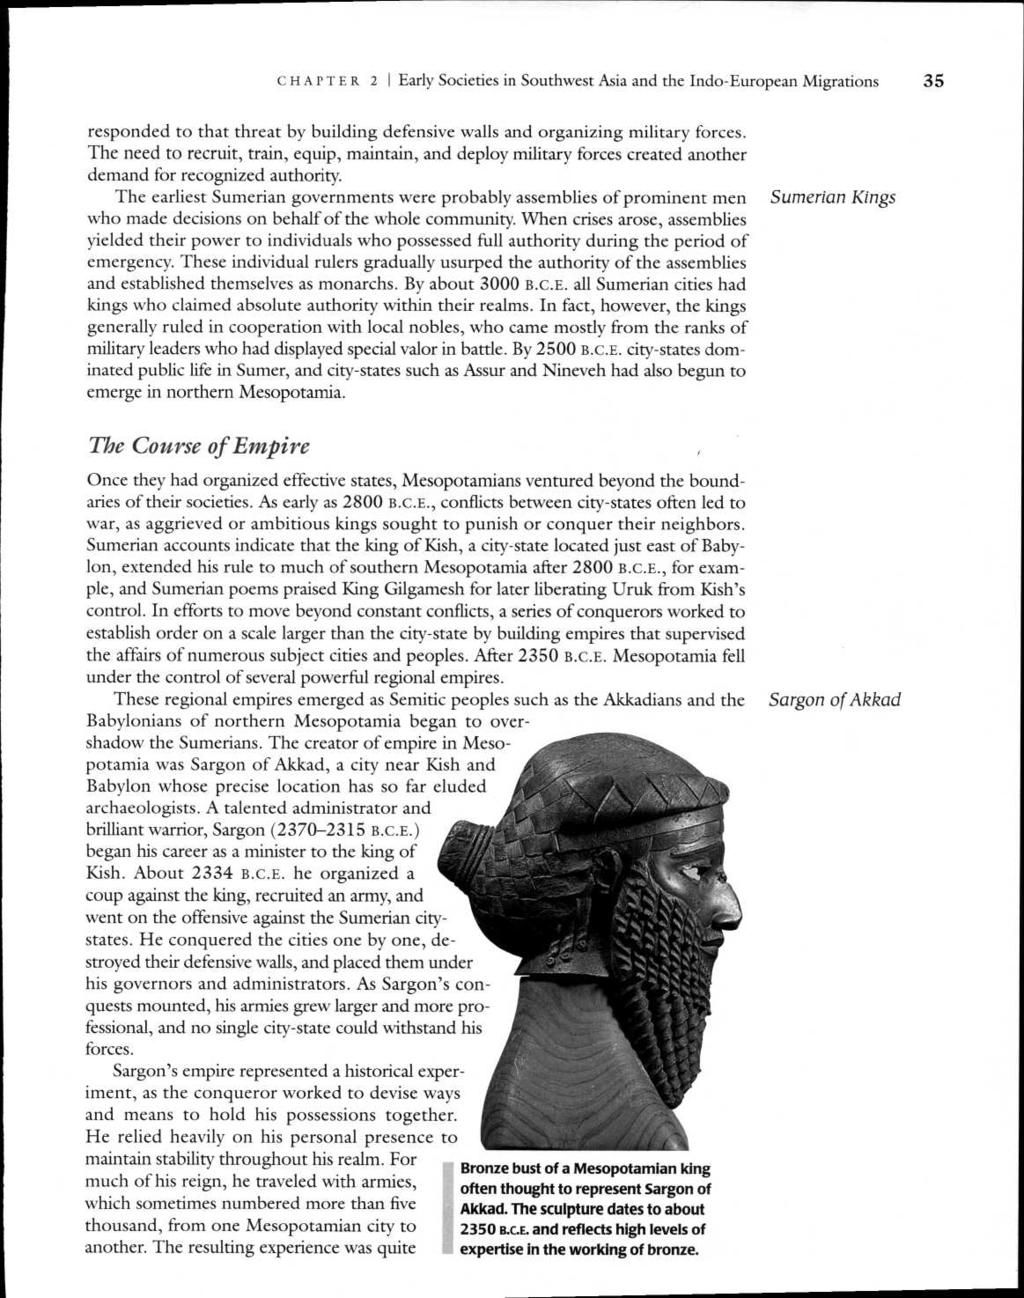 CHAPTER 2 I Early Societies in Southwest Asia and the Indo-European Migrations 35 responded to that threat by building defensive walls and organizing military forces.